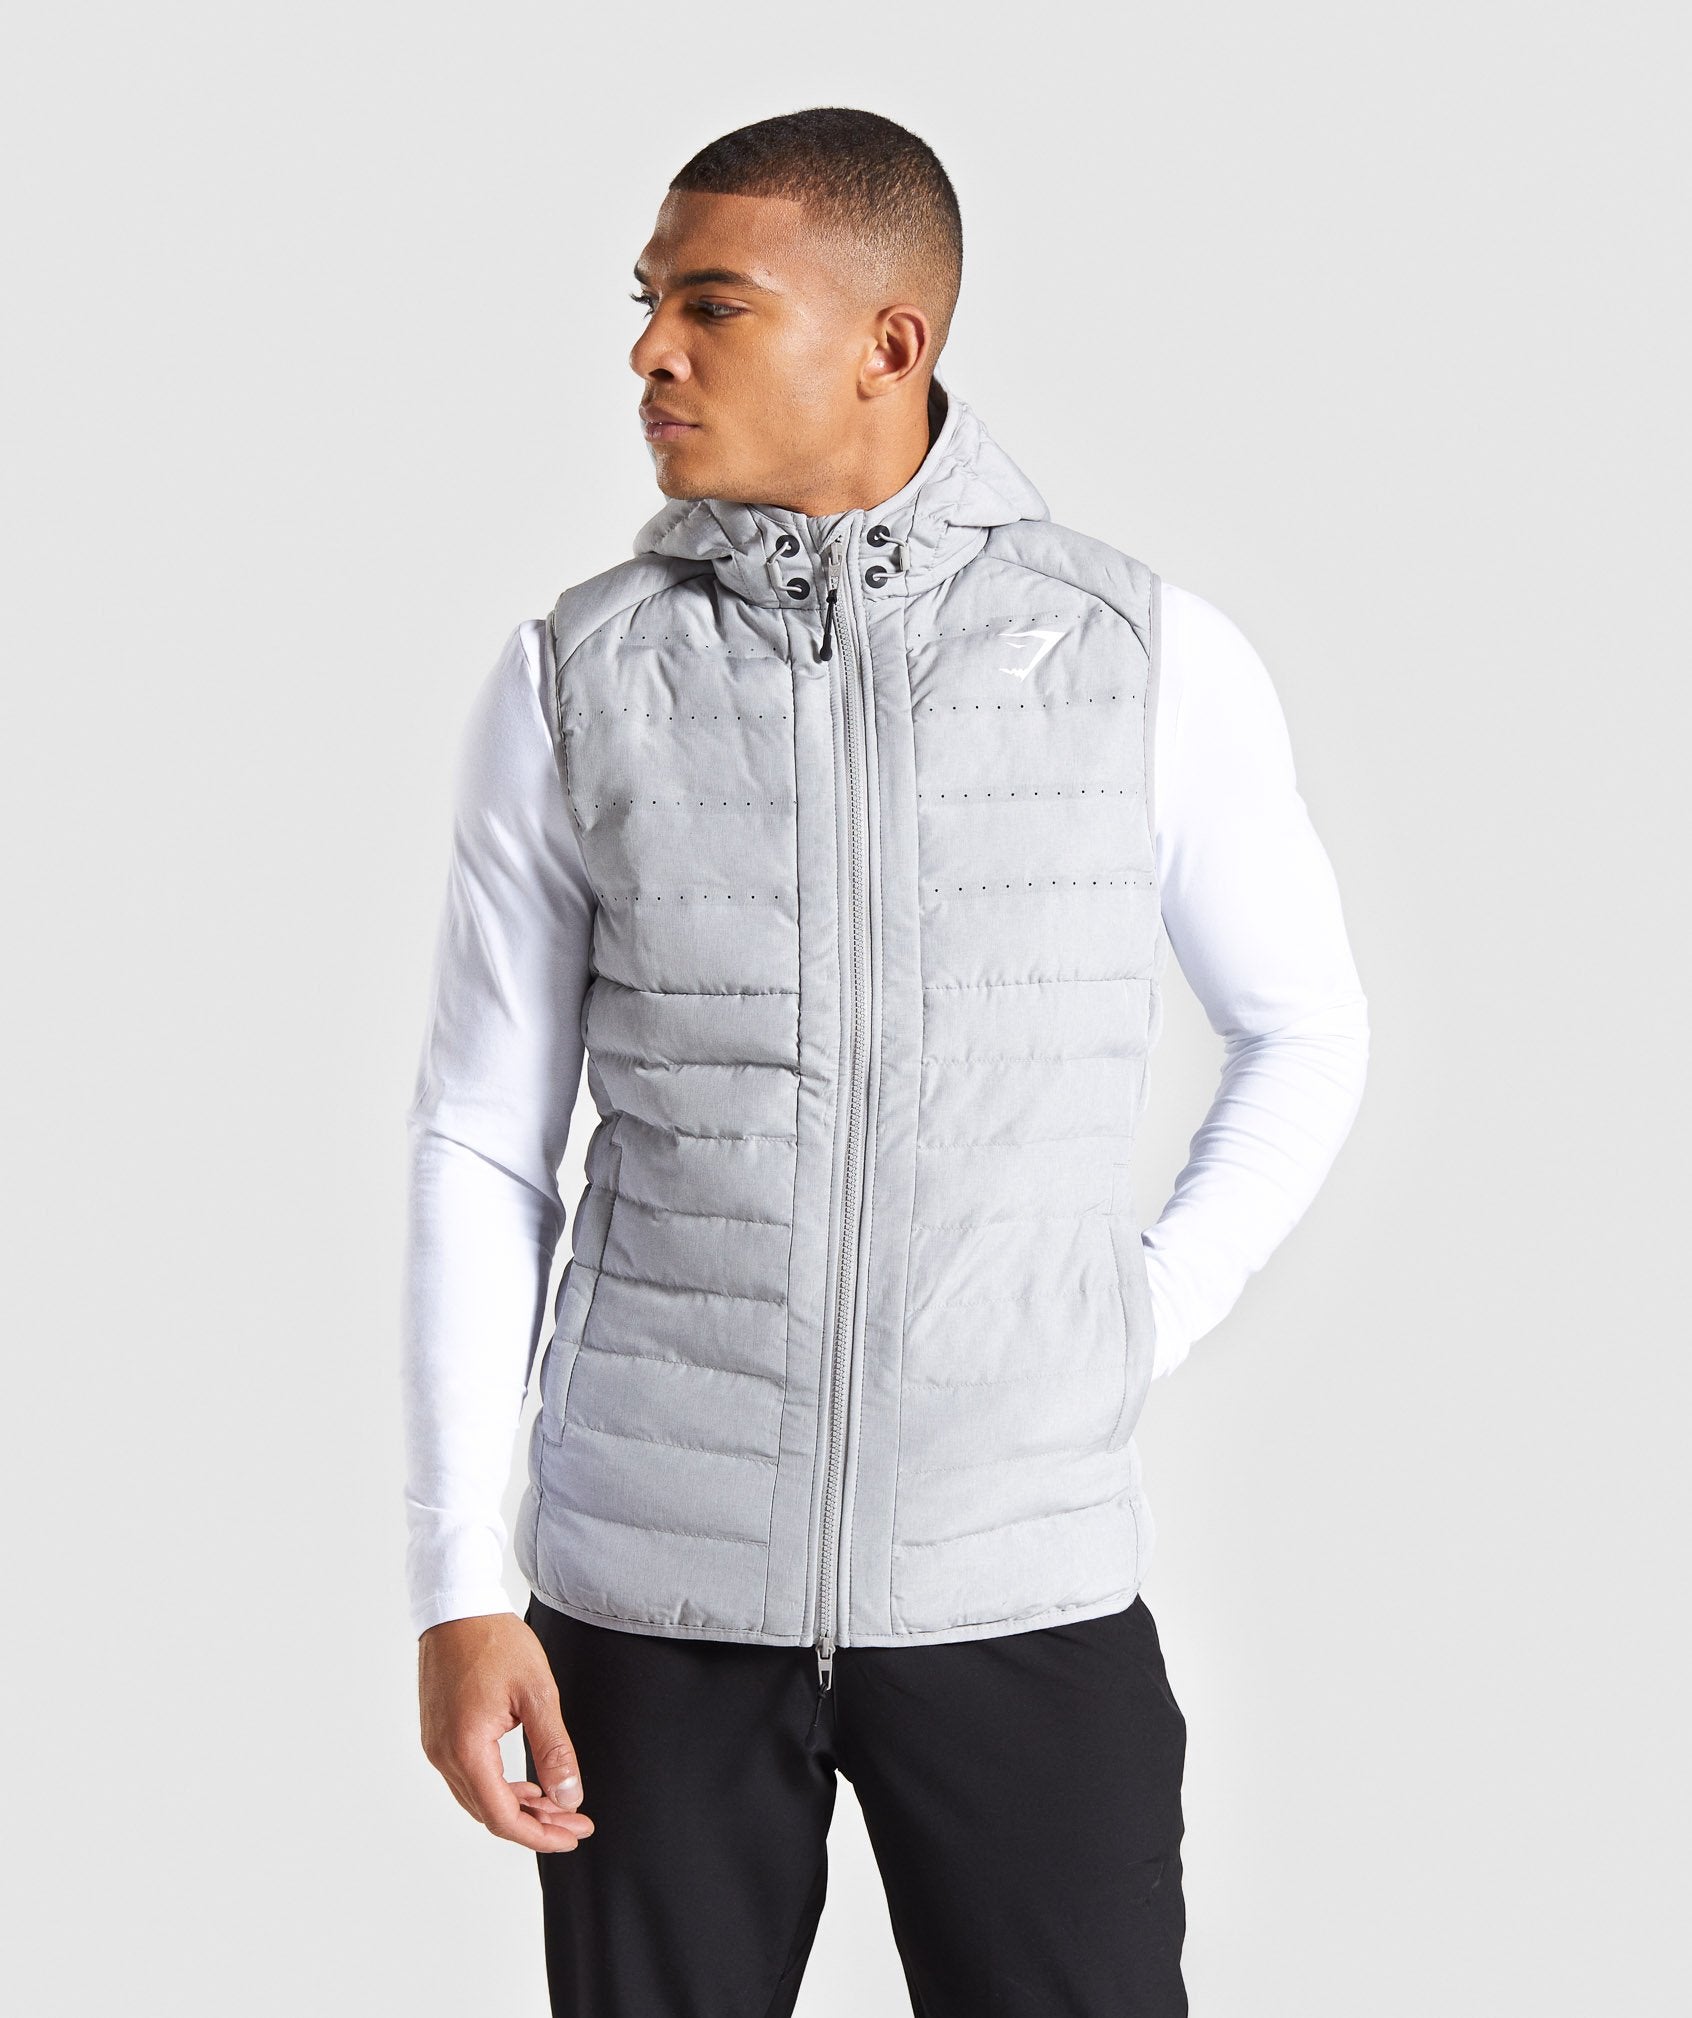 Sector Gilet V2 in Light Grey - view 1